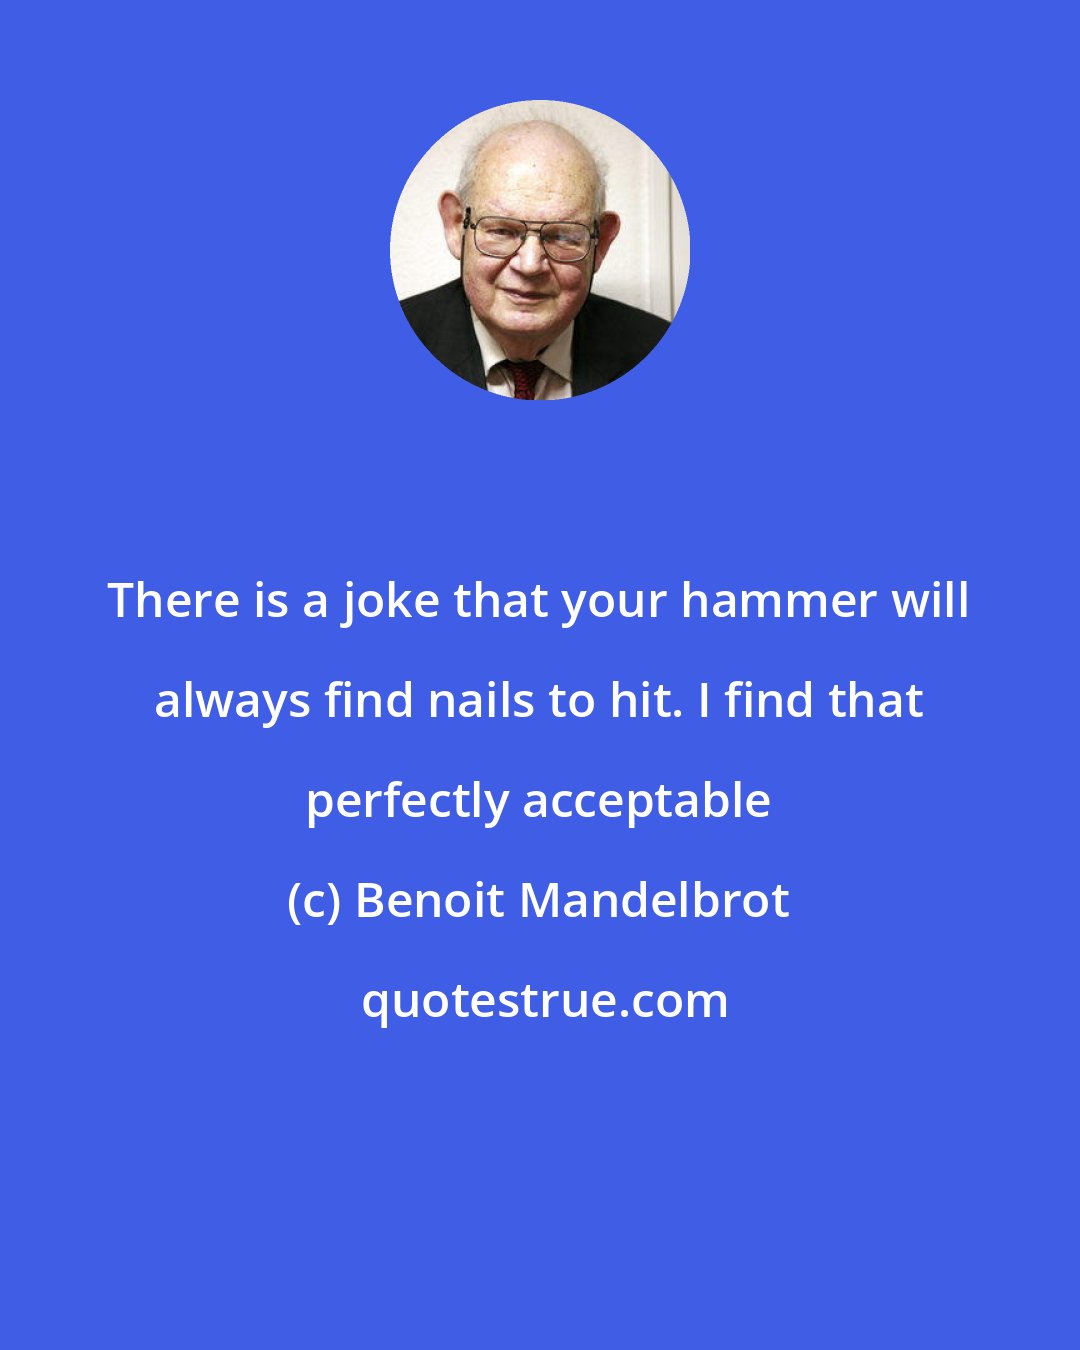 Benoit Mandelbrot: There is a joke that your hammer will always find nails to hit. I find that perfectly acceptable